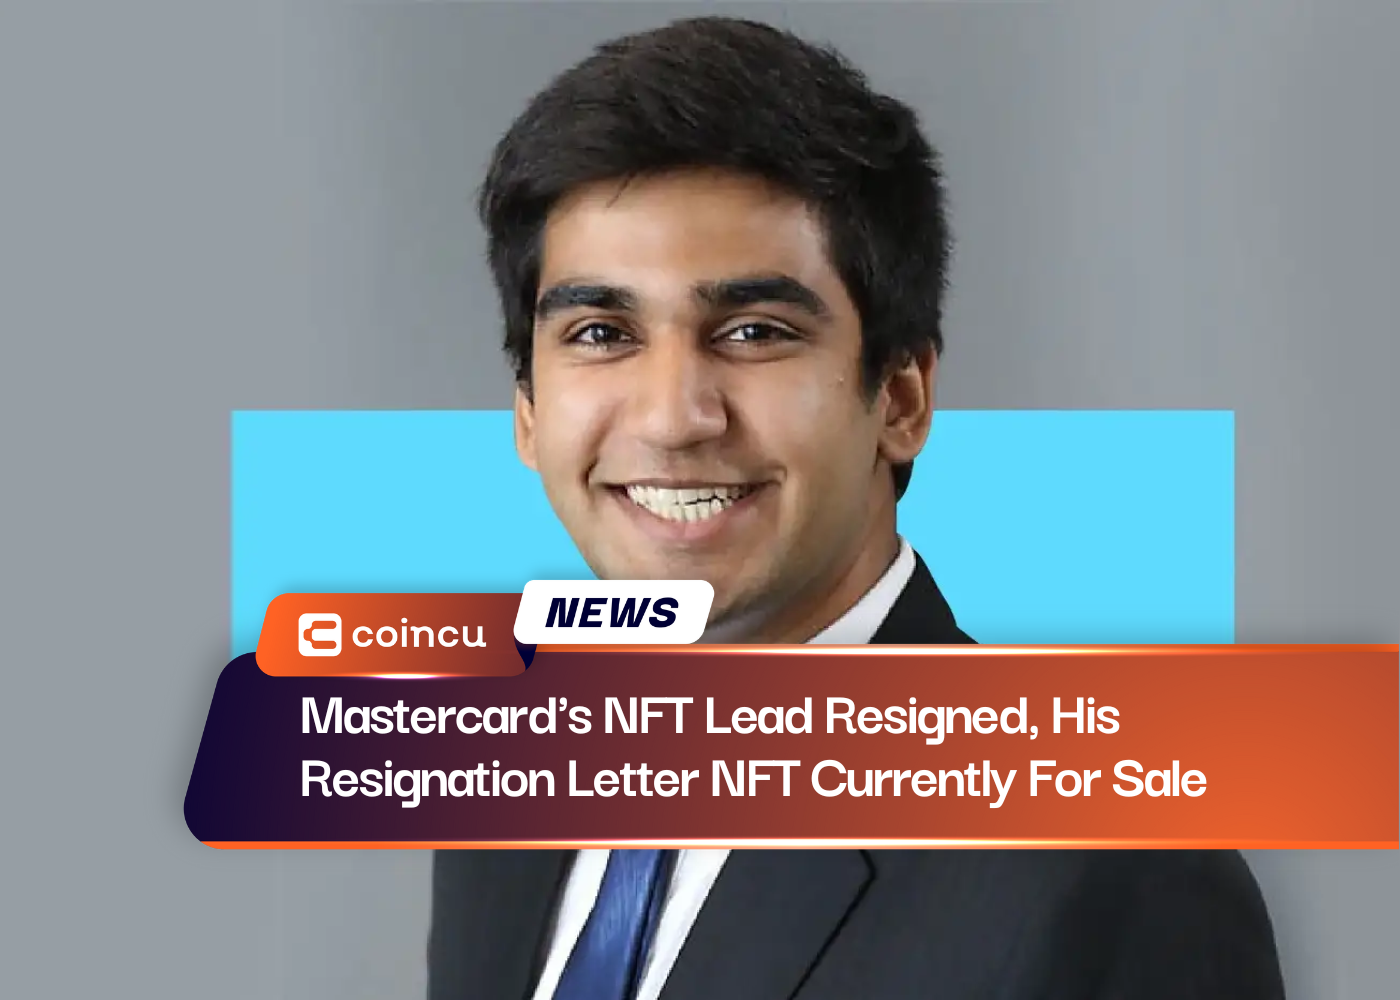 Mastercard's NFT Lead Resigned, His Resignation Letter NFT Currently For Sale